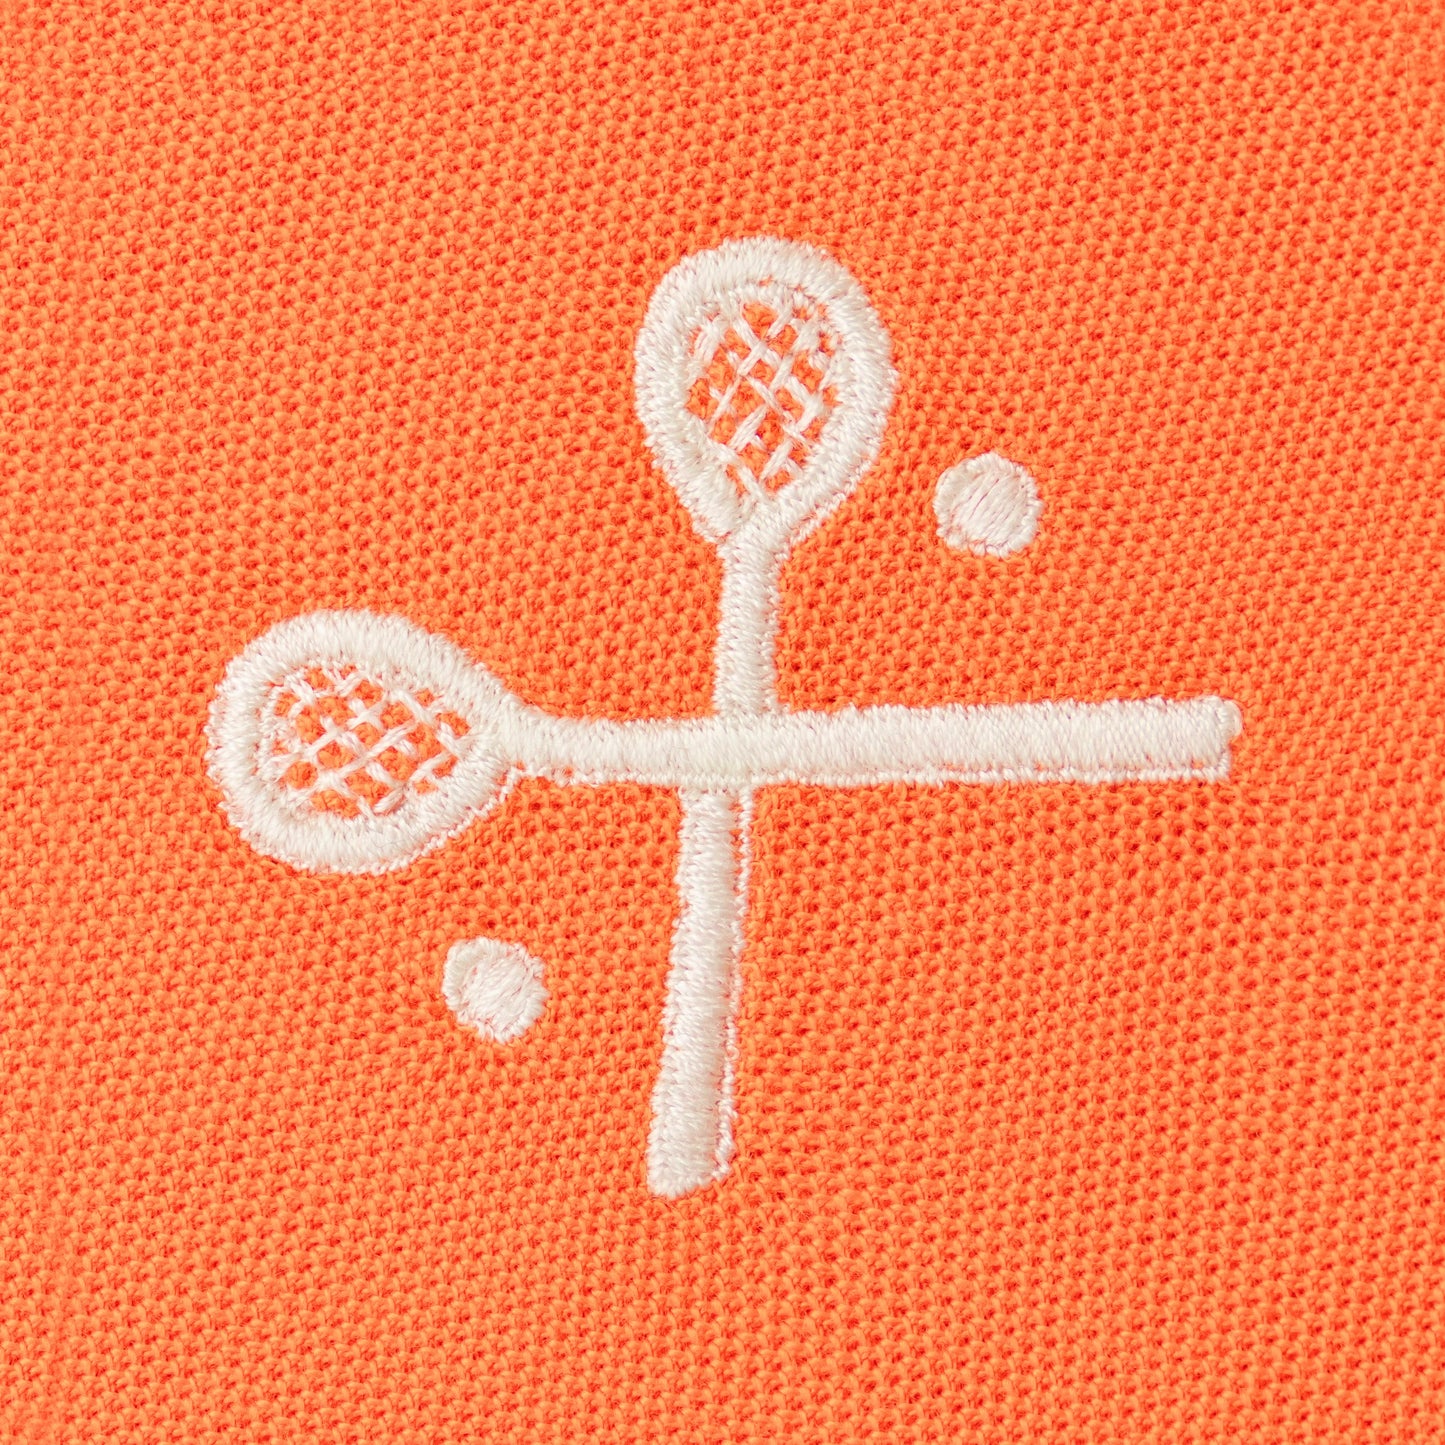 White embroidered crossed racquets motif on orange polo.